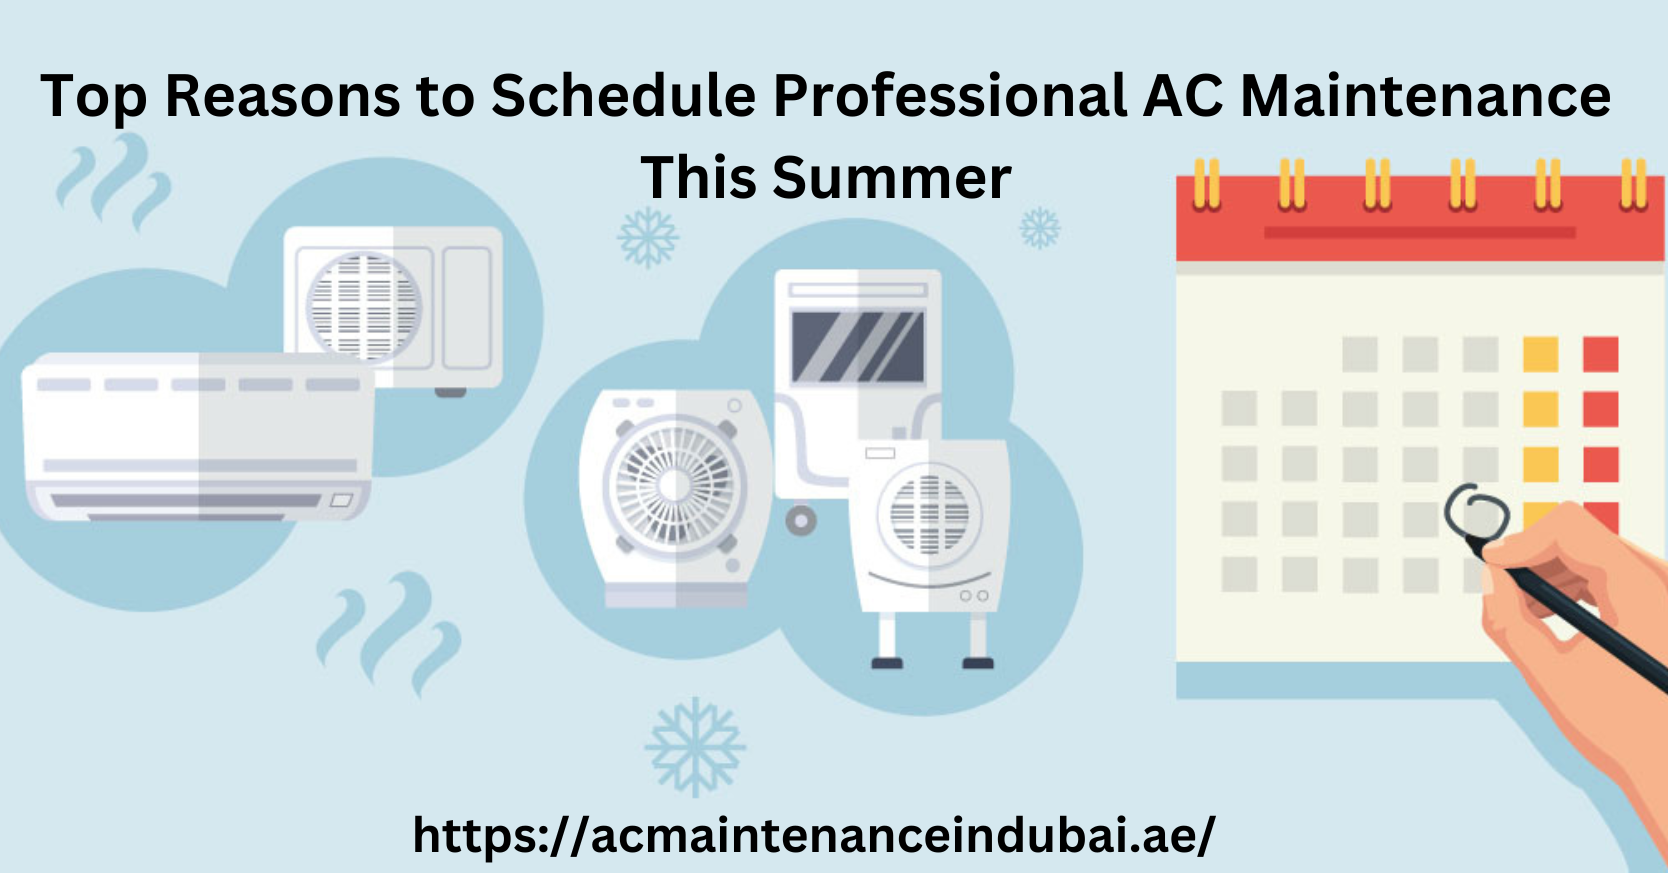 Top Reasons to Schedule Professional AC Maintenance This Summer